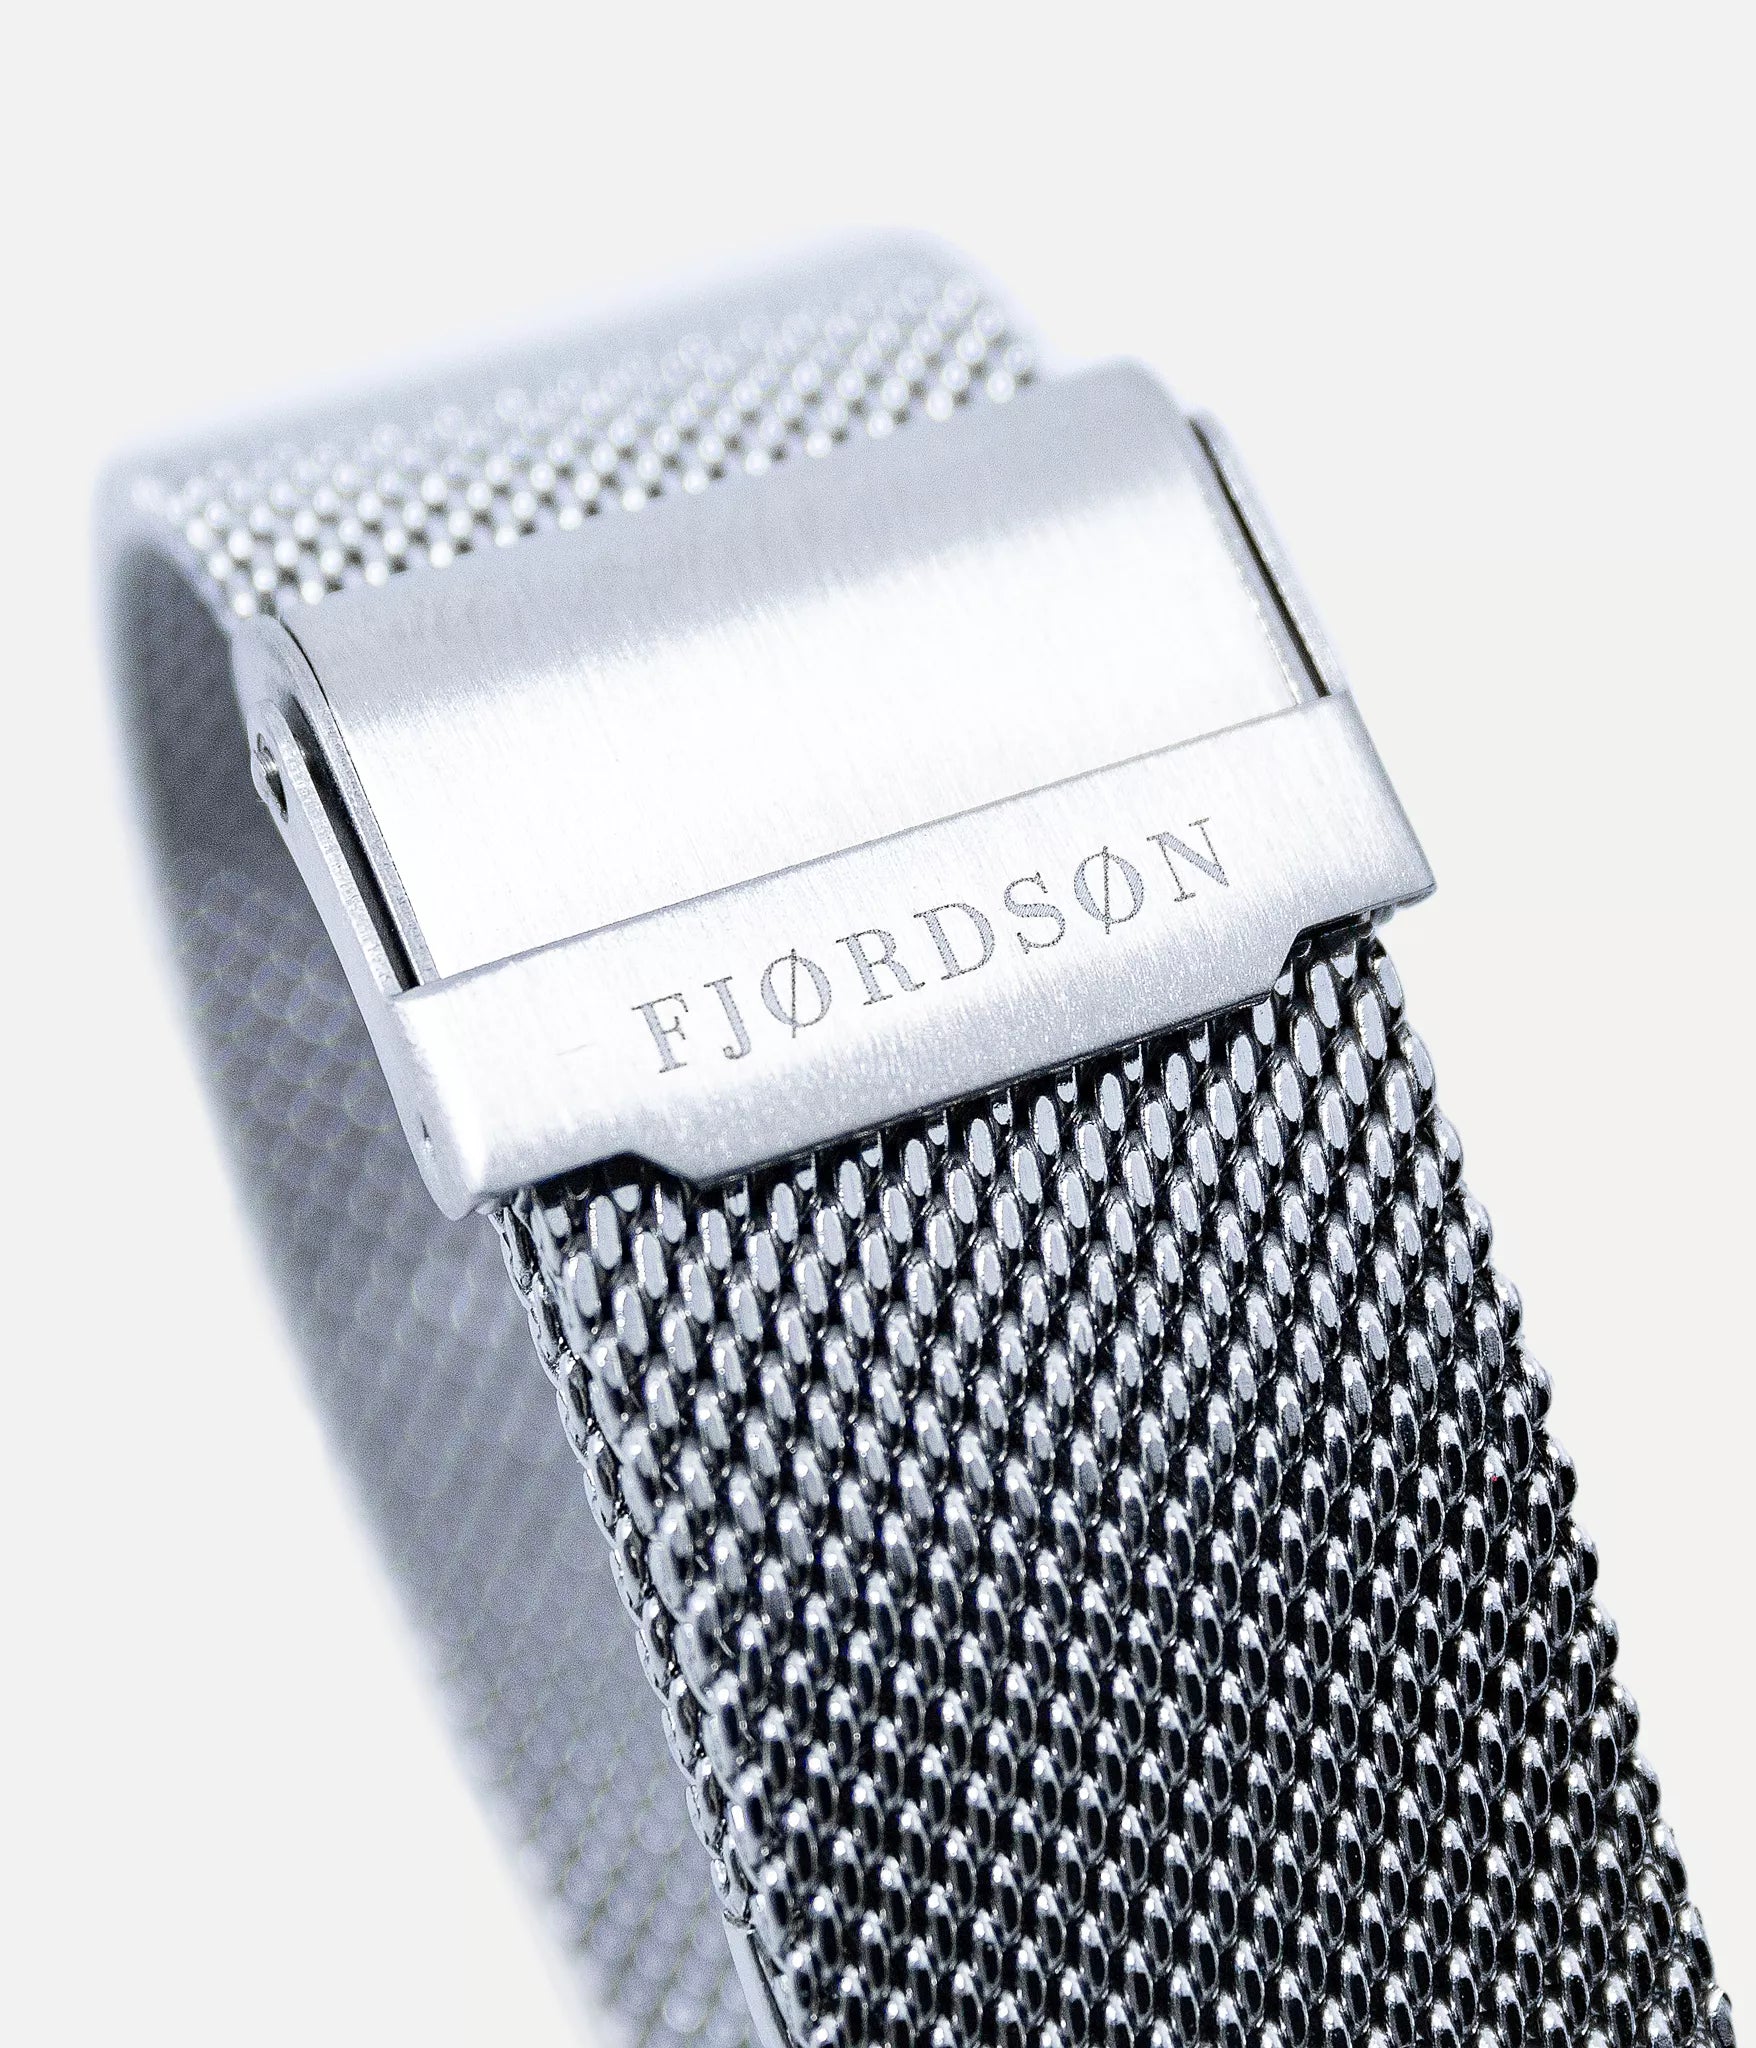 Back strap detail shot - Fjordson matching watches with blue dial and silver metal watch strap - Couple Watches Gift set - vegan & approved by PETA - Swiss made